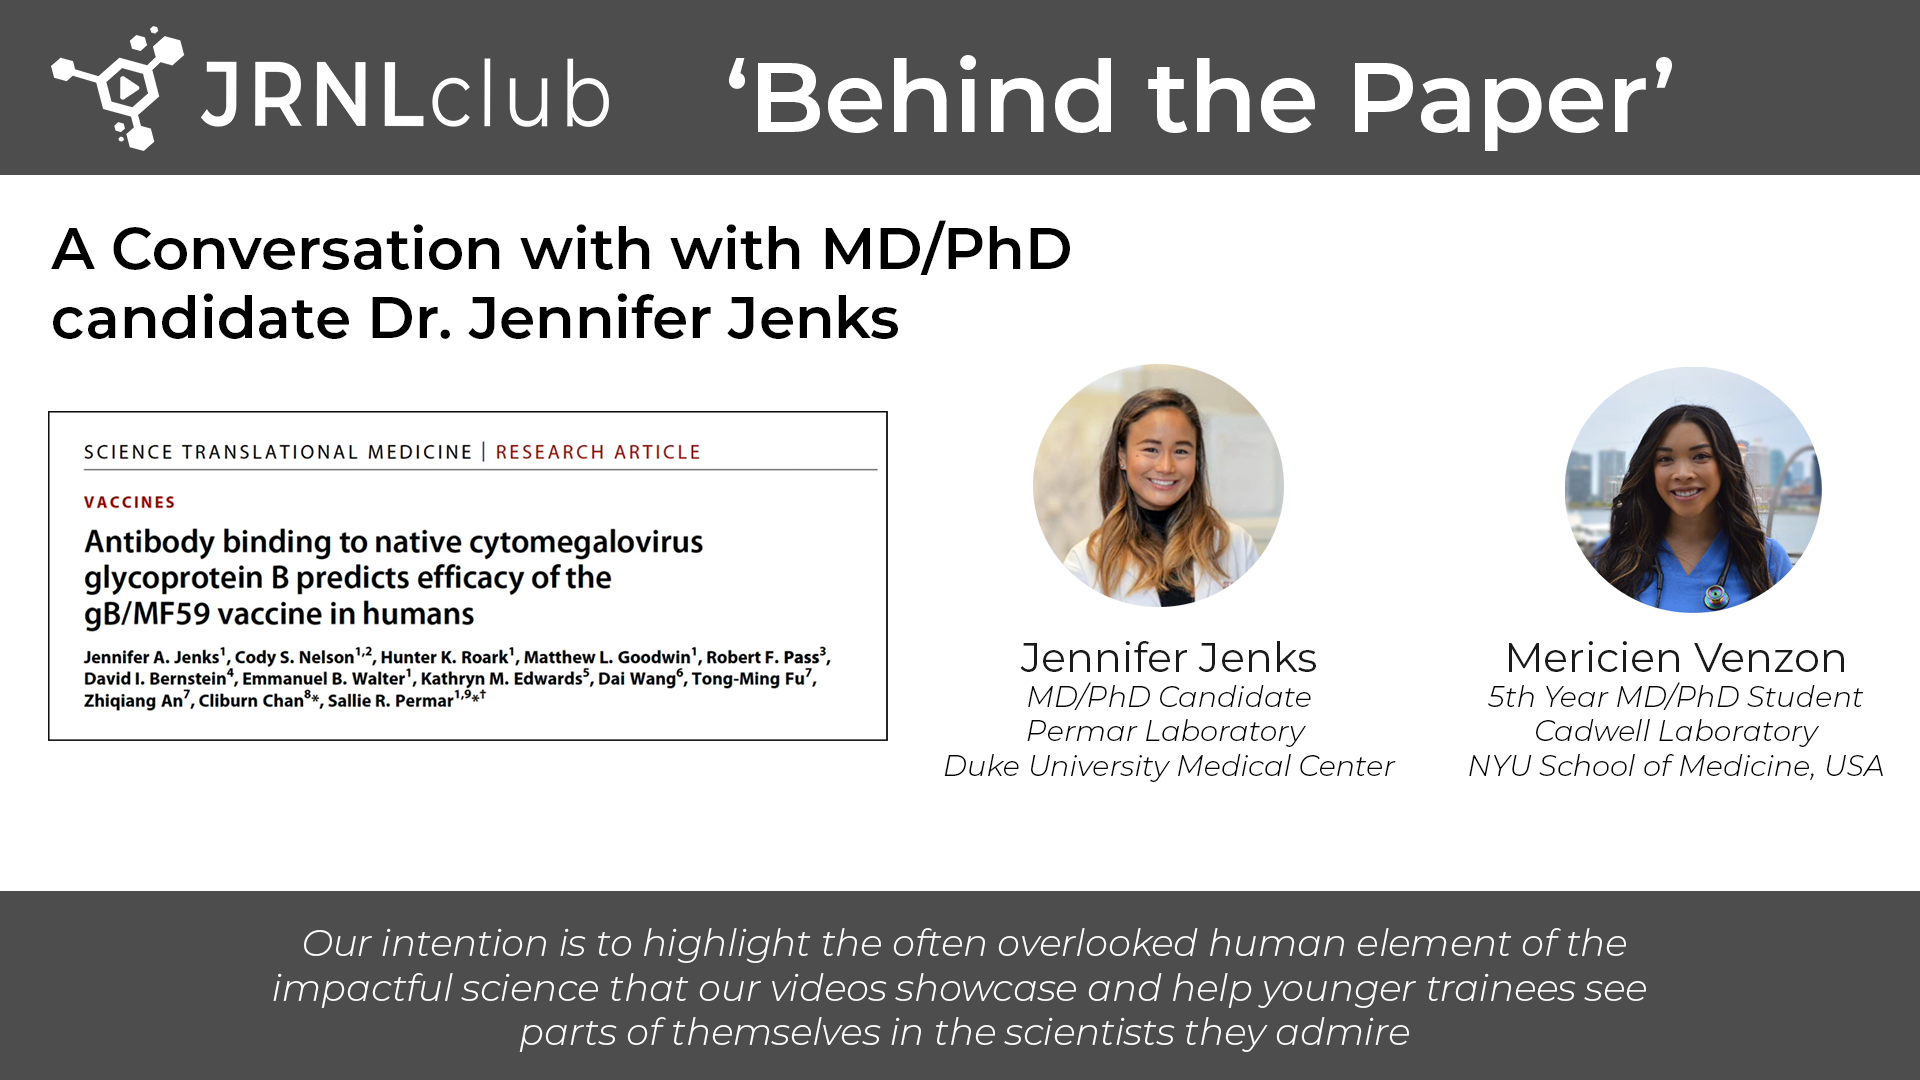 Behind the Paper' with MD/PhD candidate Dr. Jennifer Jenks